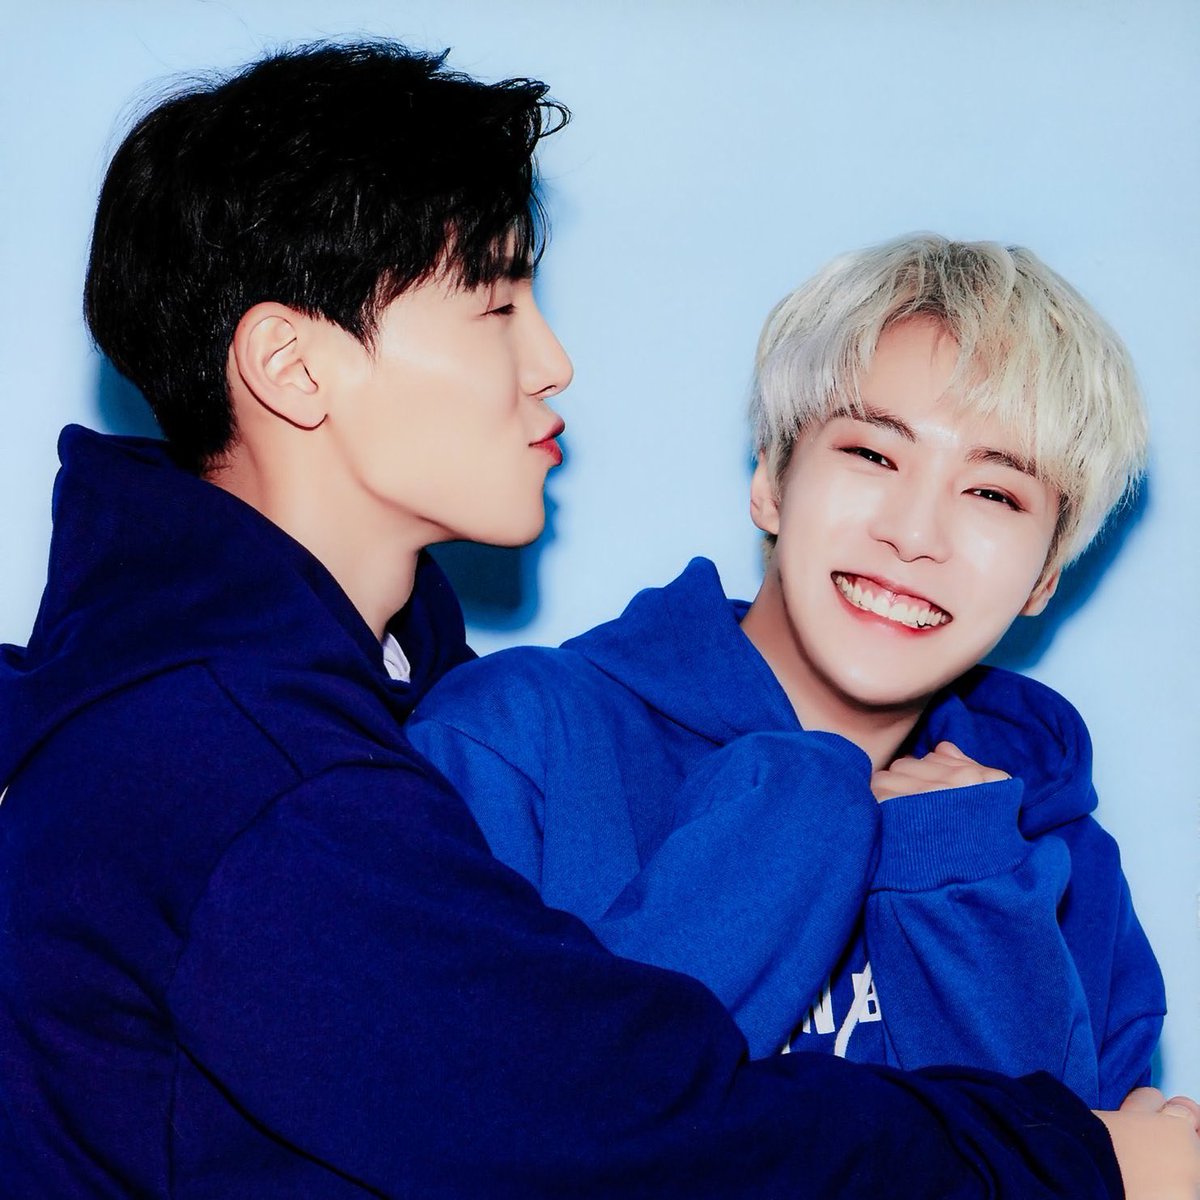 showhyuk- minhyuk brings the funny and silly side out of shownu - i feel like they really look up to eachother in different aspects - ‘what’s your secret to make minhyuk stop talking? nothing’